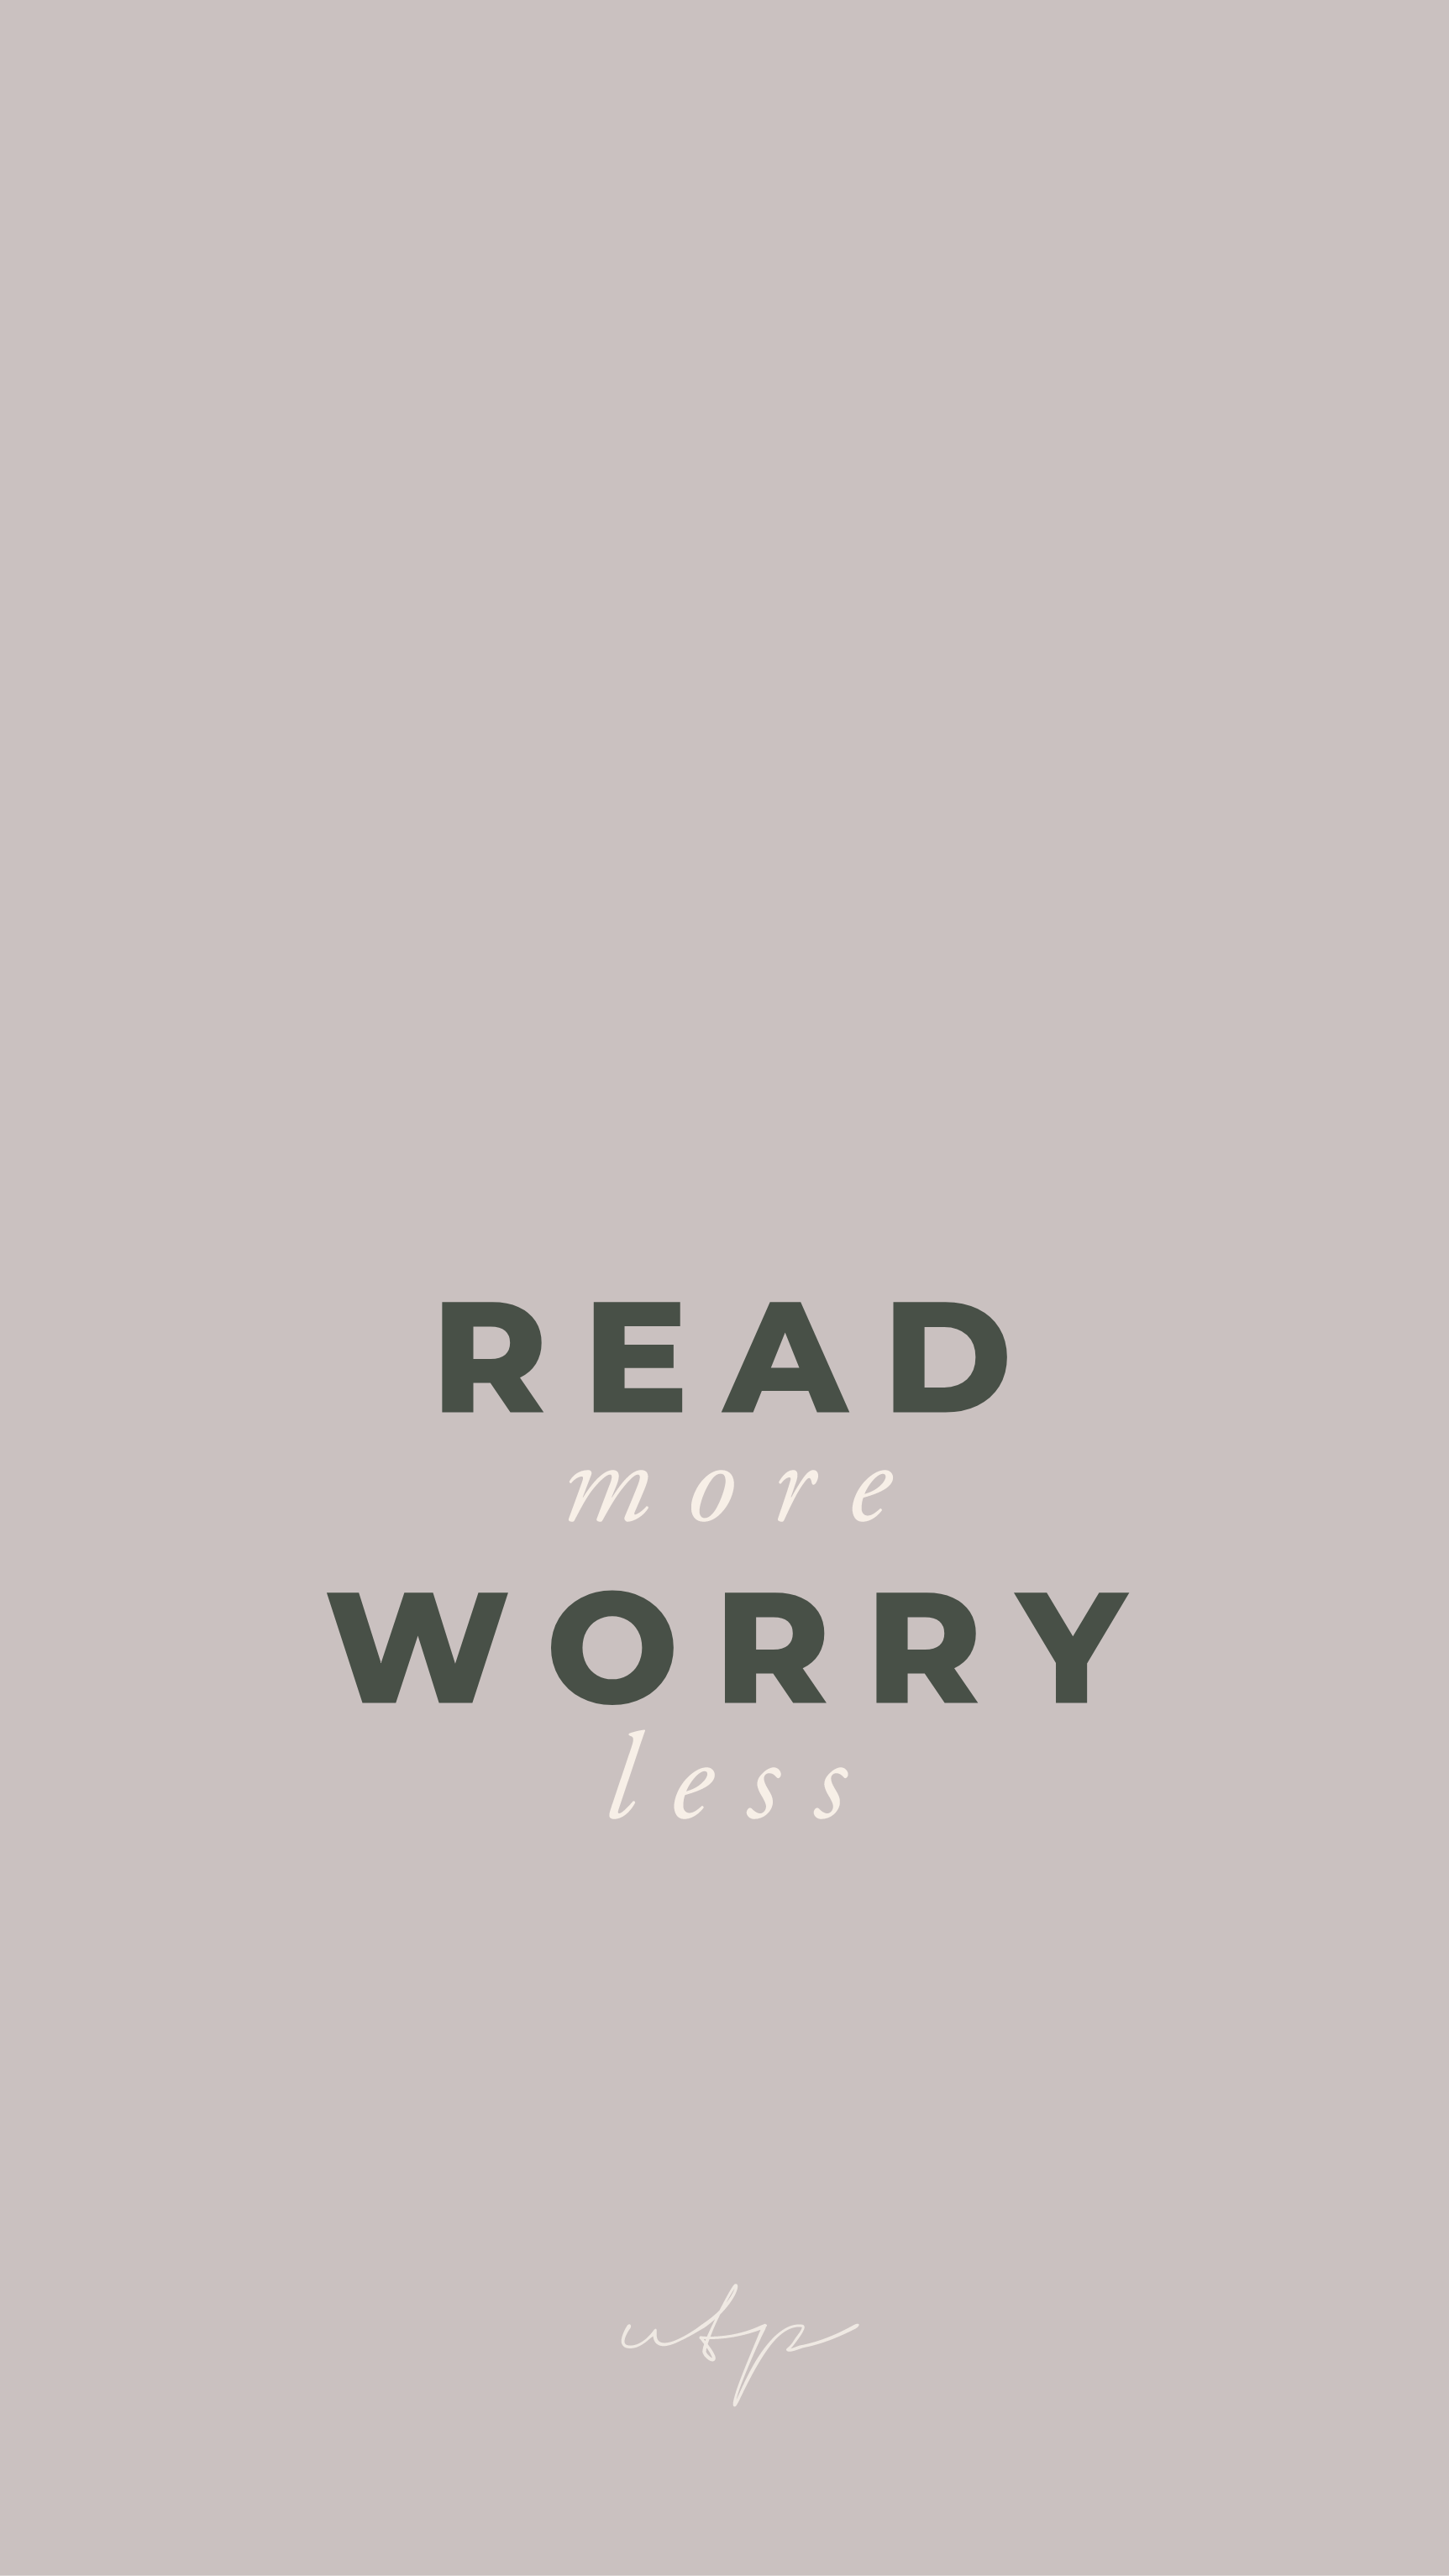 READ MORE WORRY LESS PHONE WALLPAPER. Bookworm quotes, Book worms, Book aesthetic